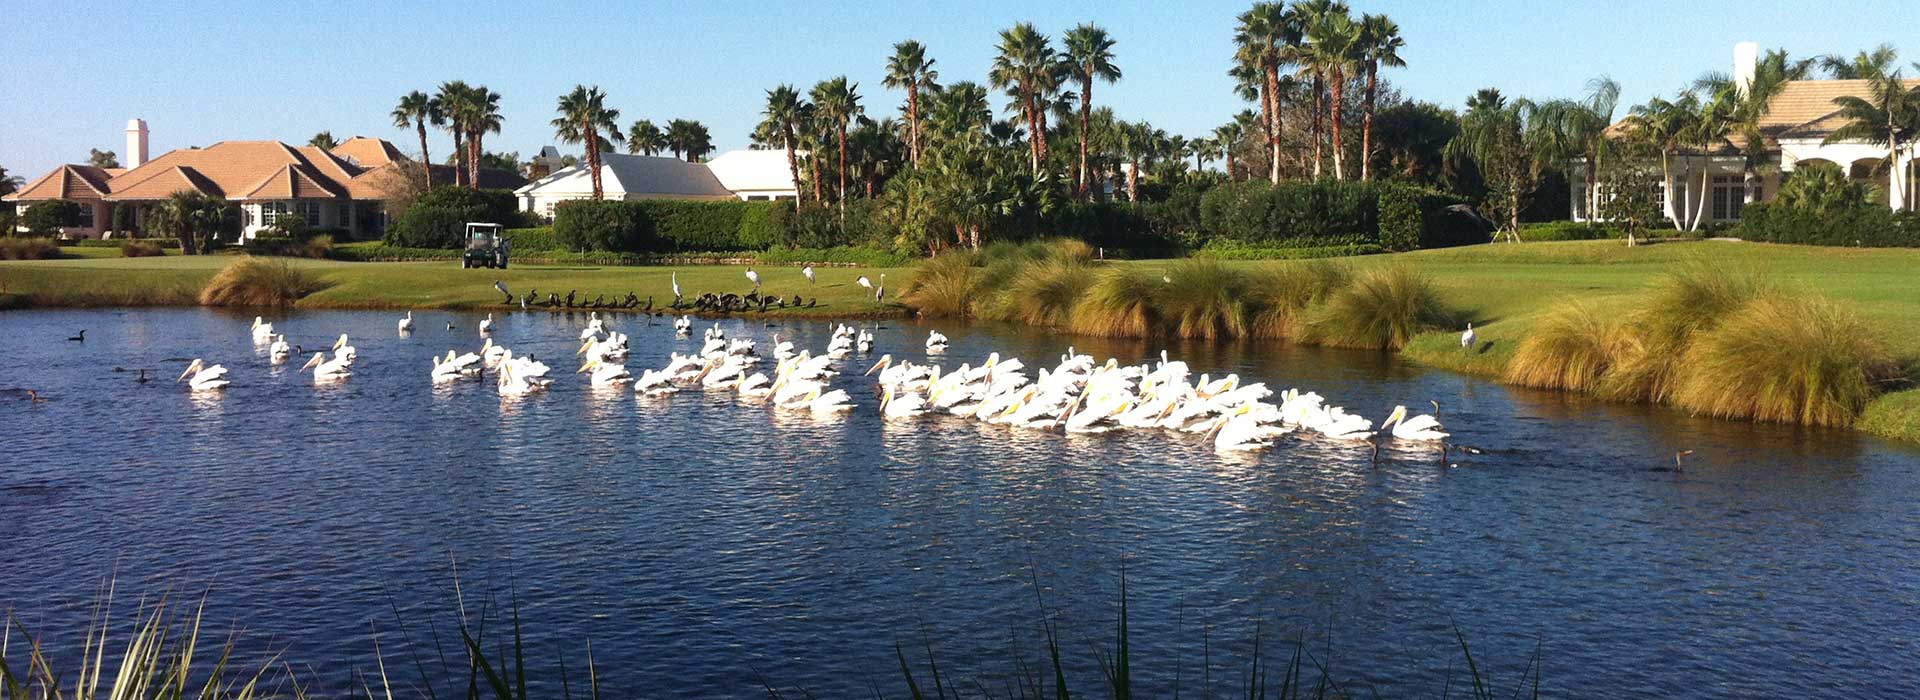 White birds on the lake behind homes in Orchid Island